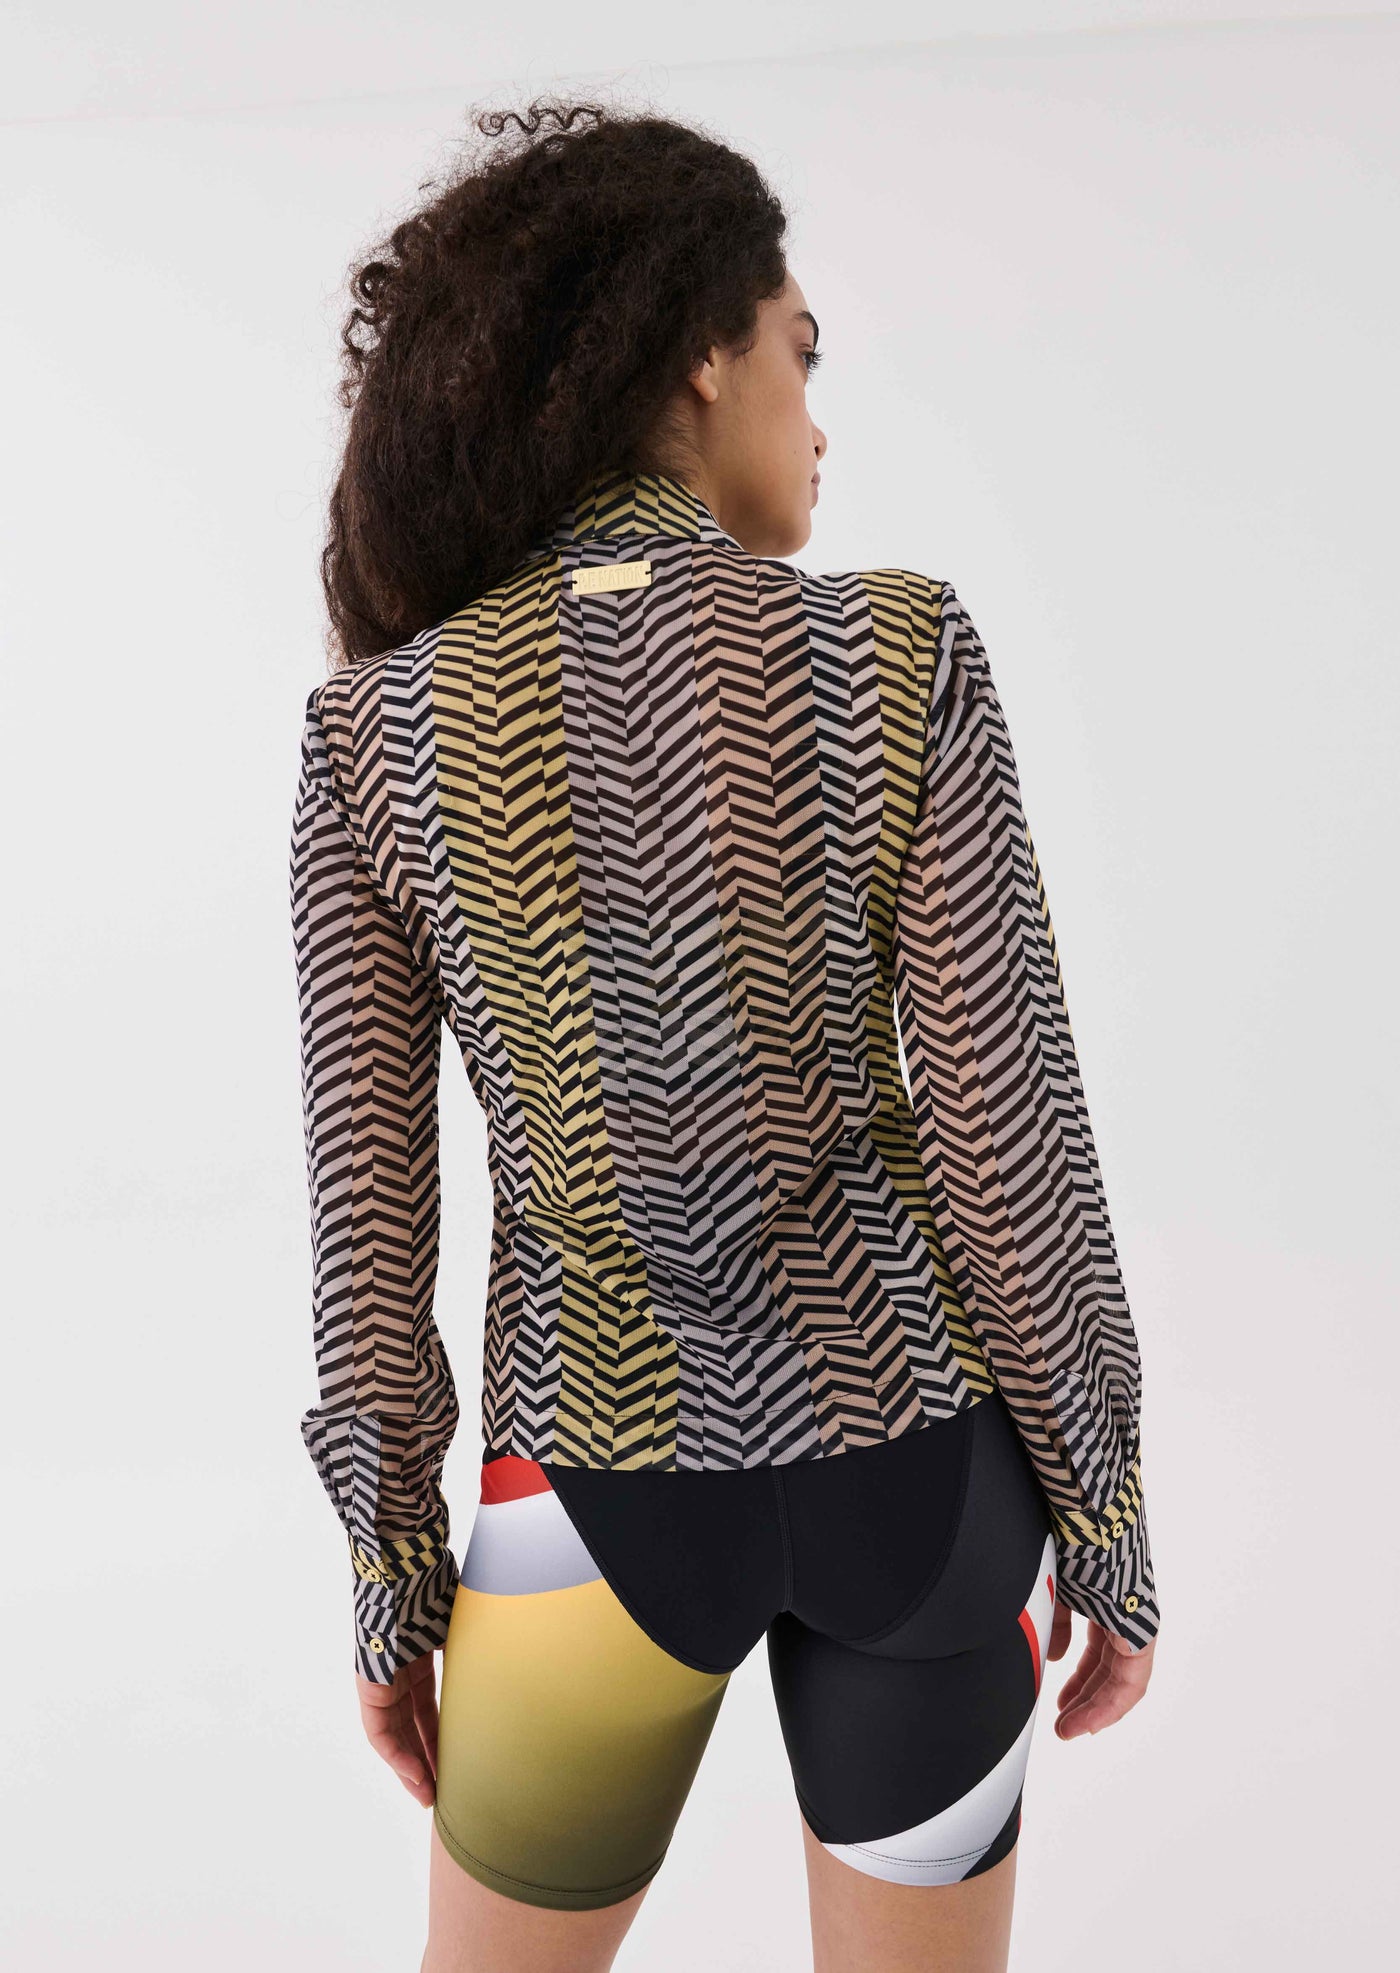 ABSTRACTION SHIRT IN ZIG ZAG PRINT